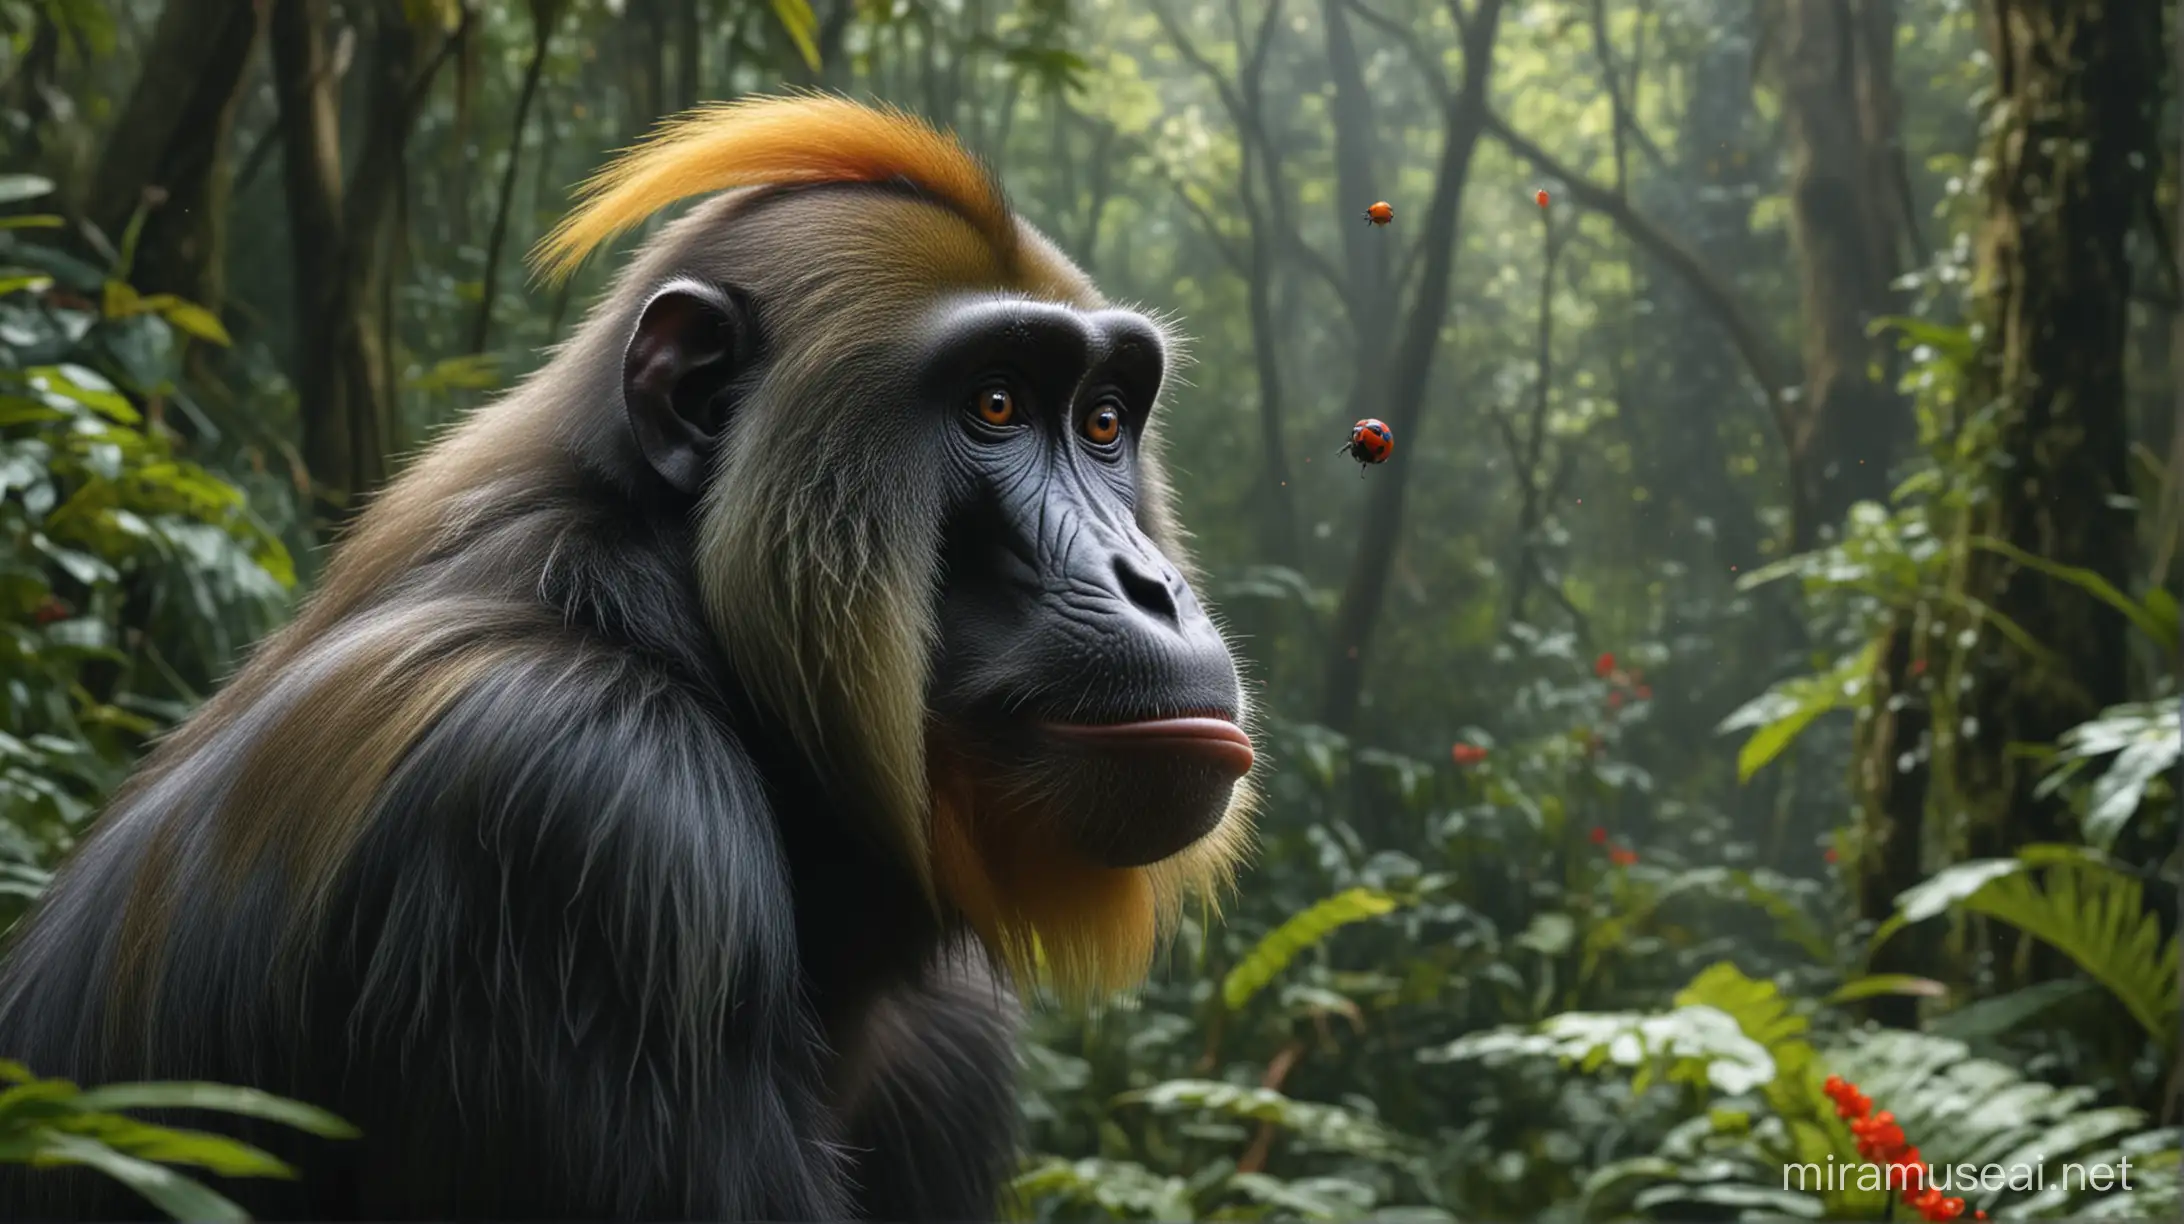 Create a vibrant and highly detailed image in 8K resolution of a mandrill, set against the backdrop of the Amazon jungle. The ladybug should be vividly colored, with bright red and black spots, making it the focal point of the image. The background should be a soft, artistically blurred array of greens and browns, typical of the dense Amazon foliage, enhancing the striking contrast with the mandrill. This setup should convey a sense of intimacy and immediacy, drawing viewers into the microscopic world of this charming insect."